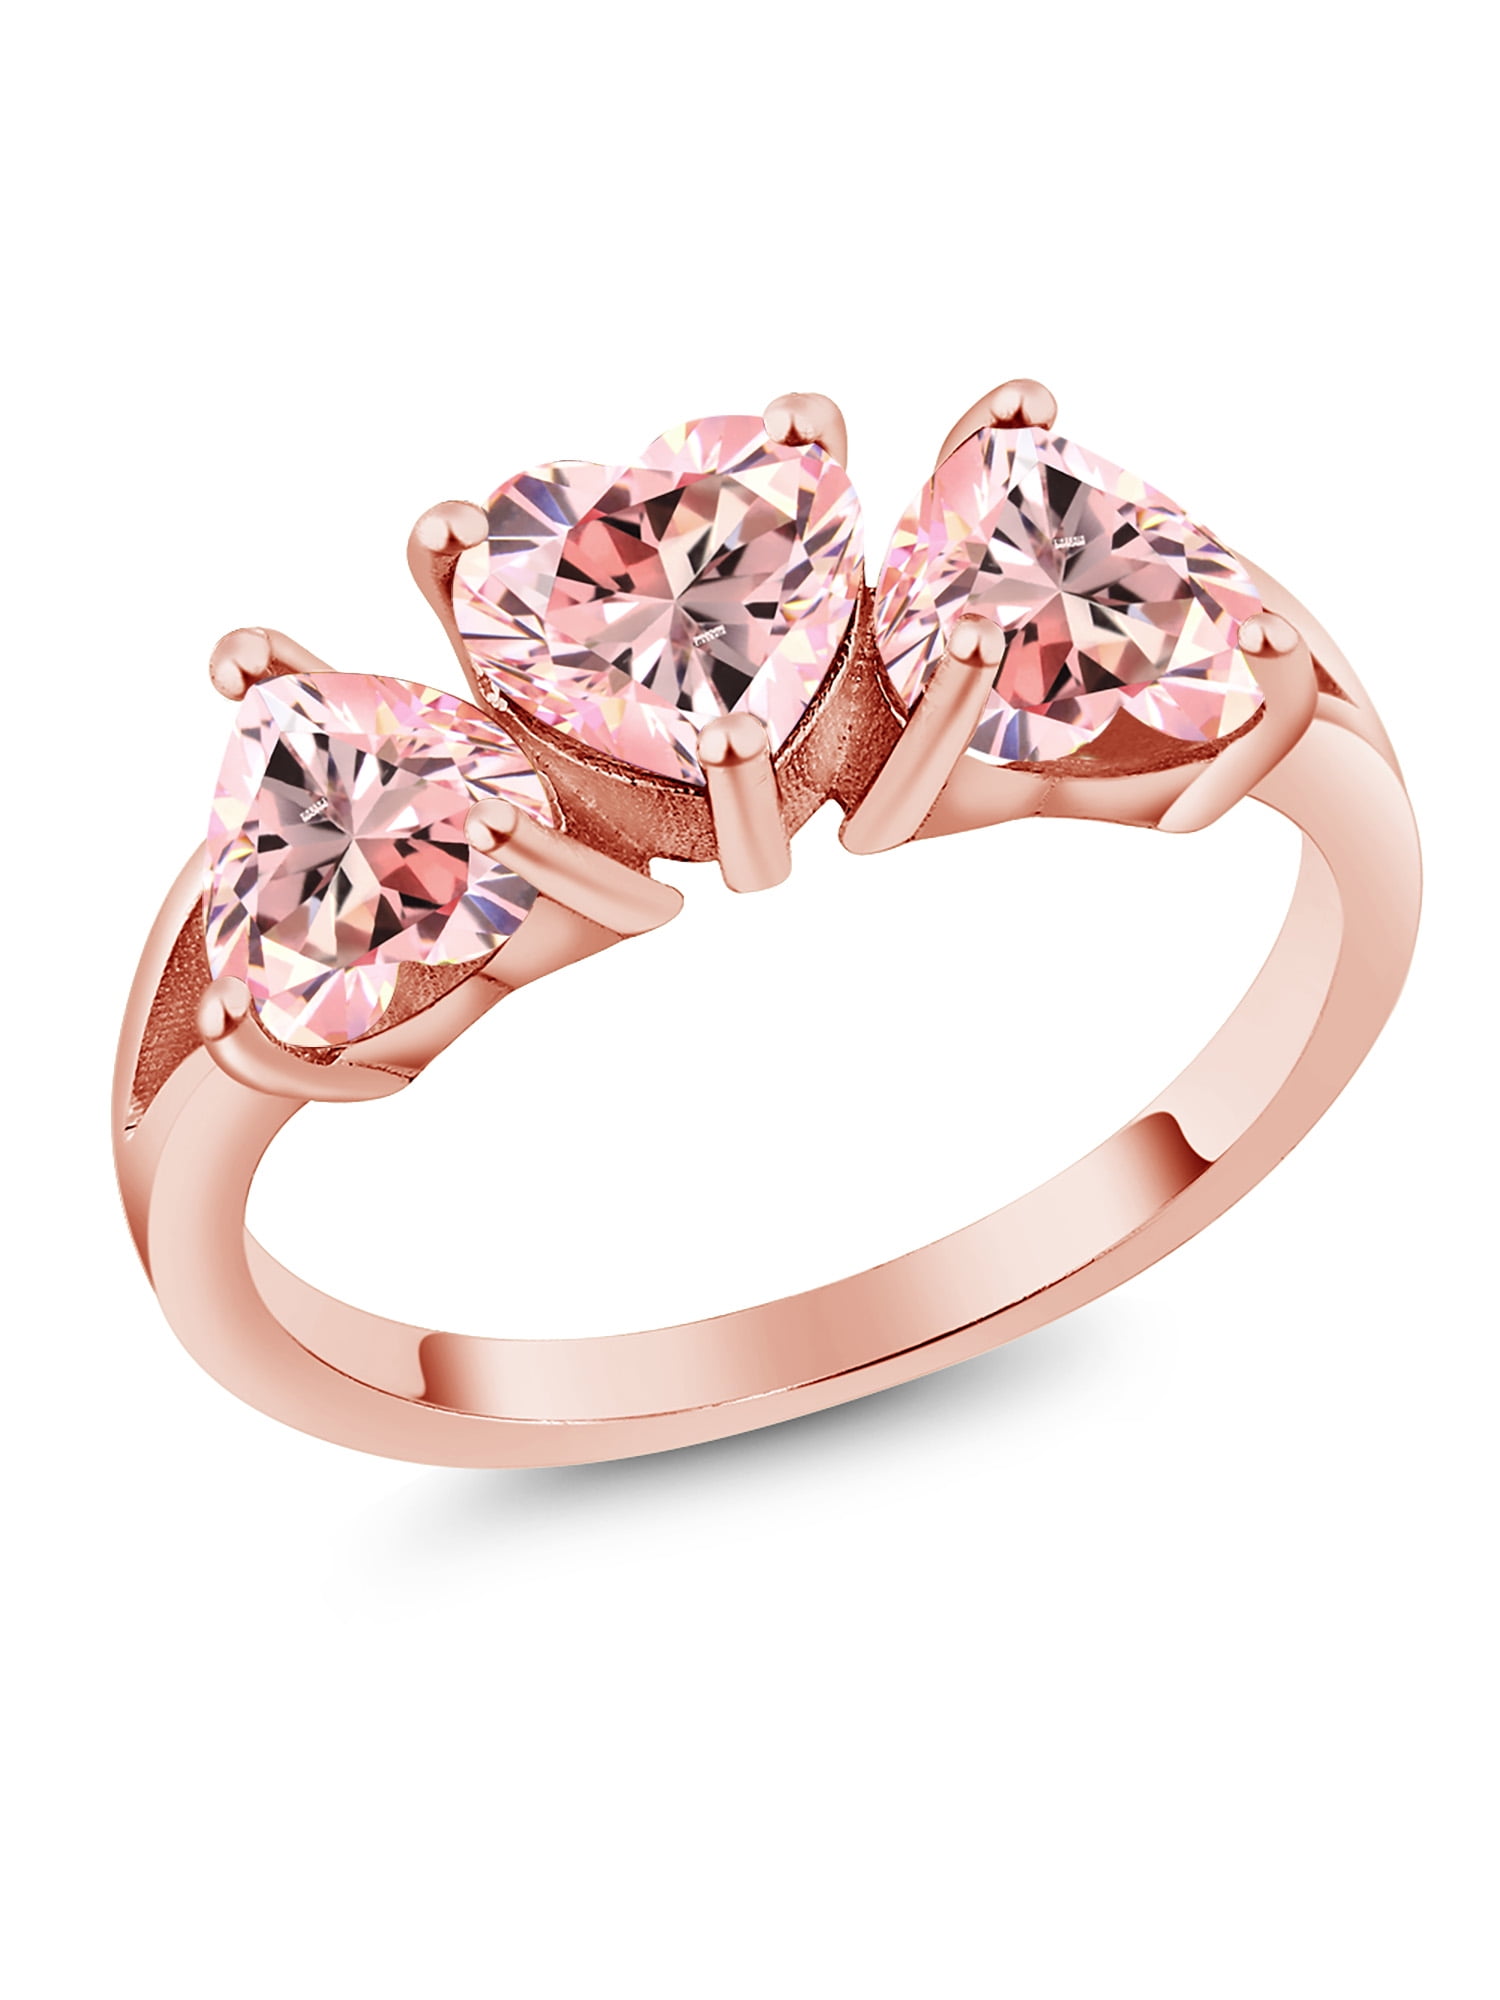 Sterling Silver Rose Gold Plated Pink Morganite CZ Ring Size 5/6/7/8/9/10